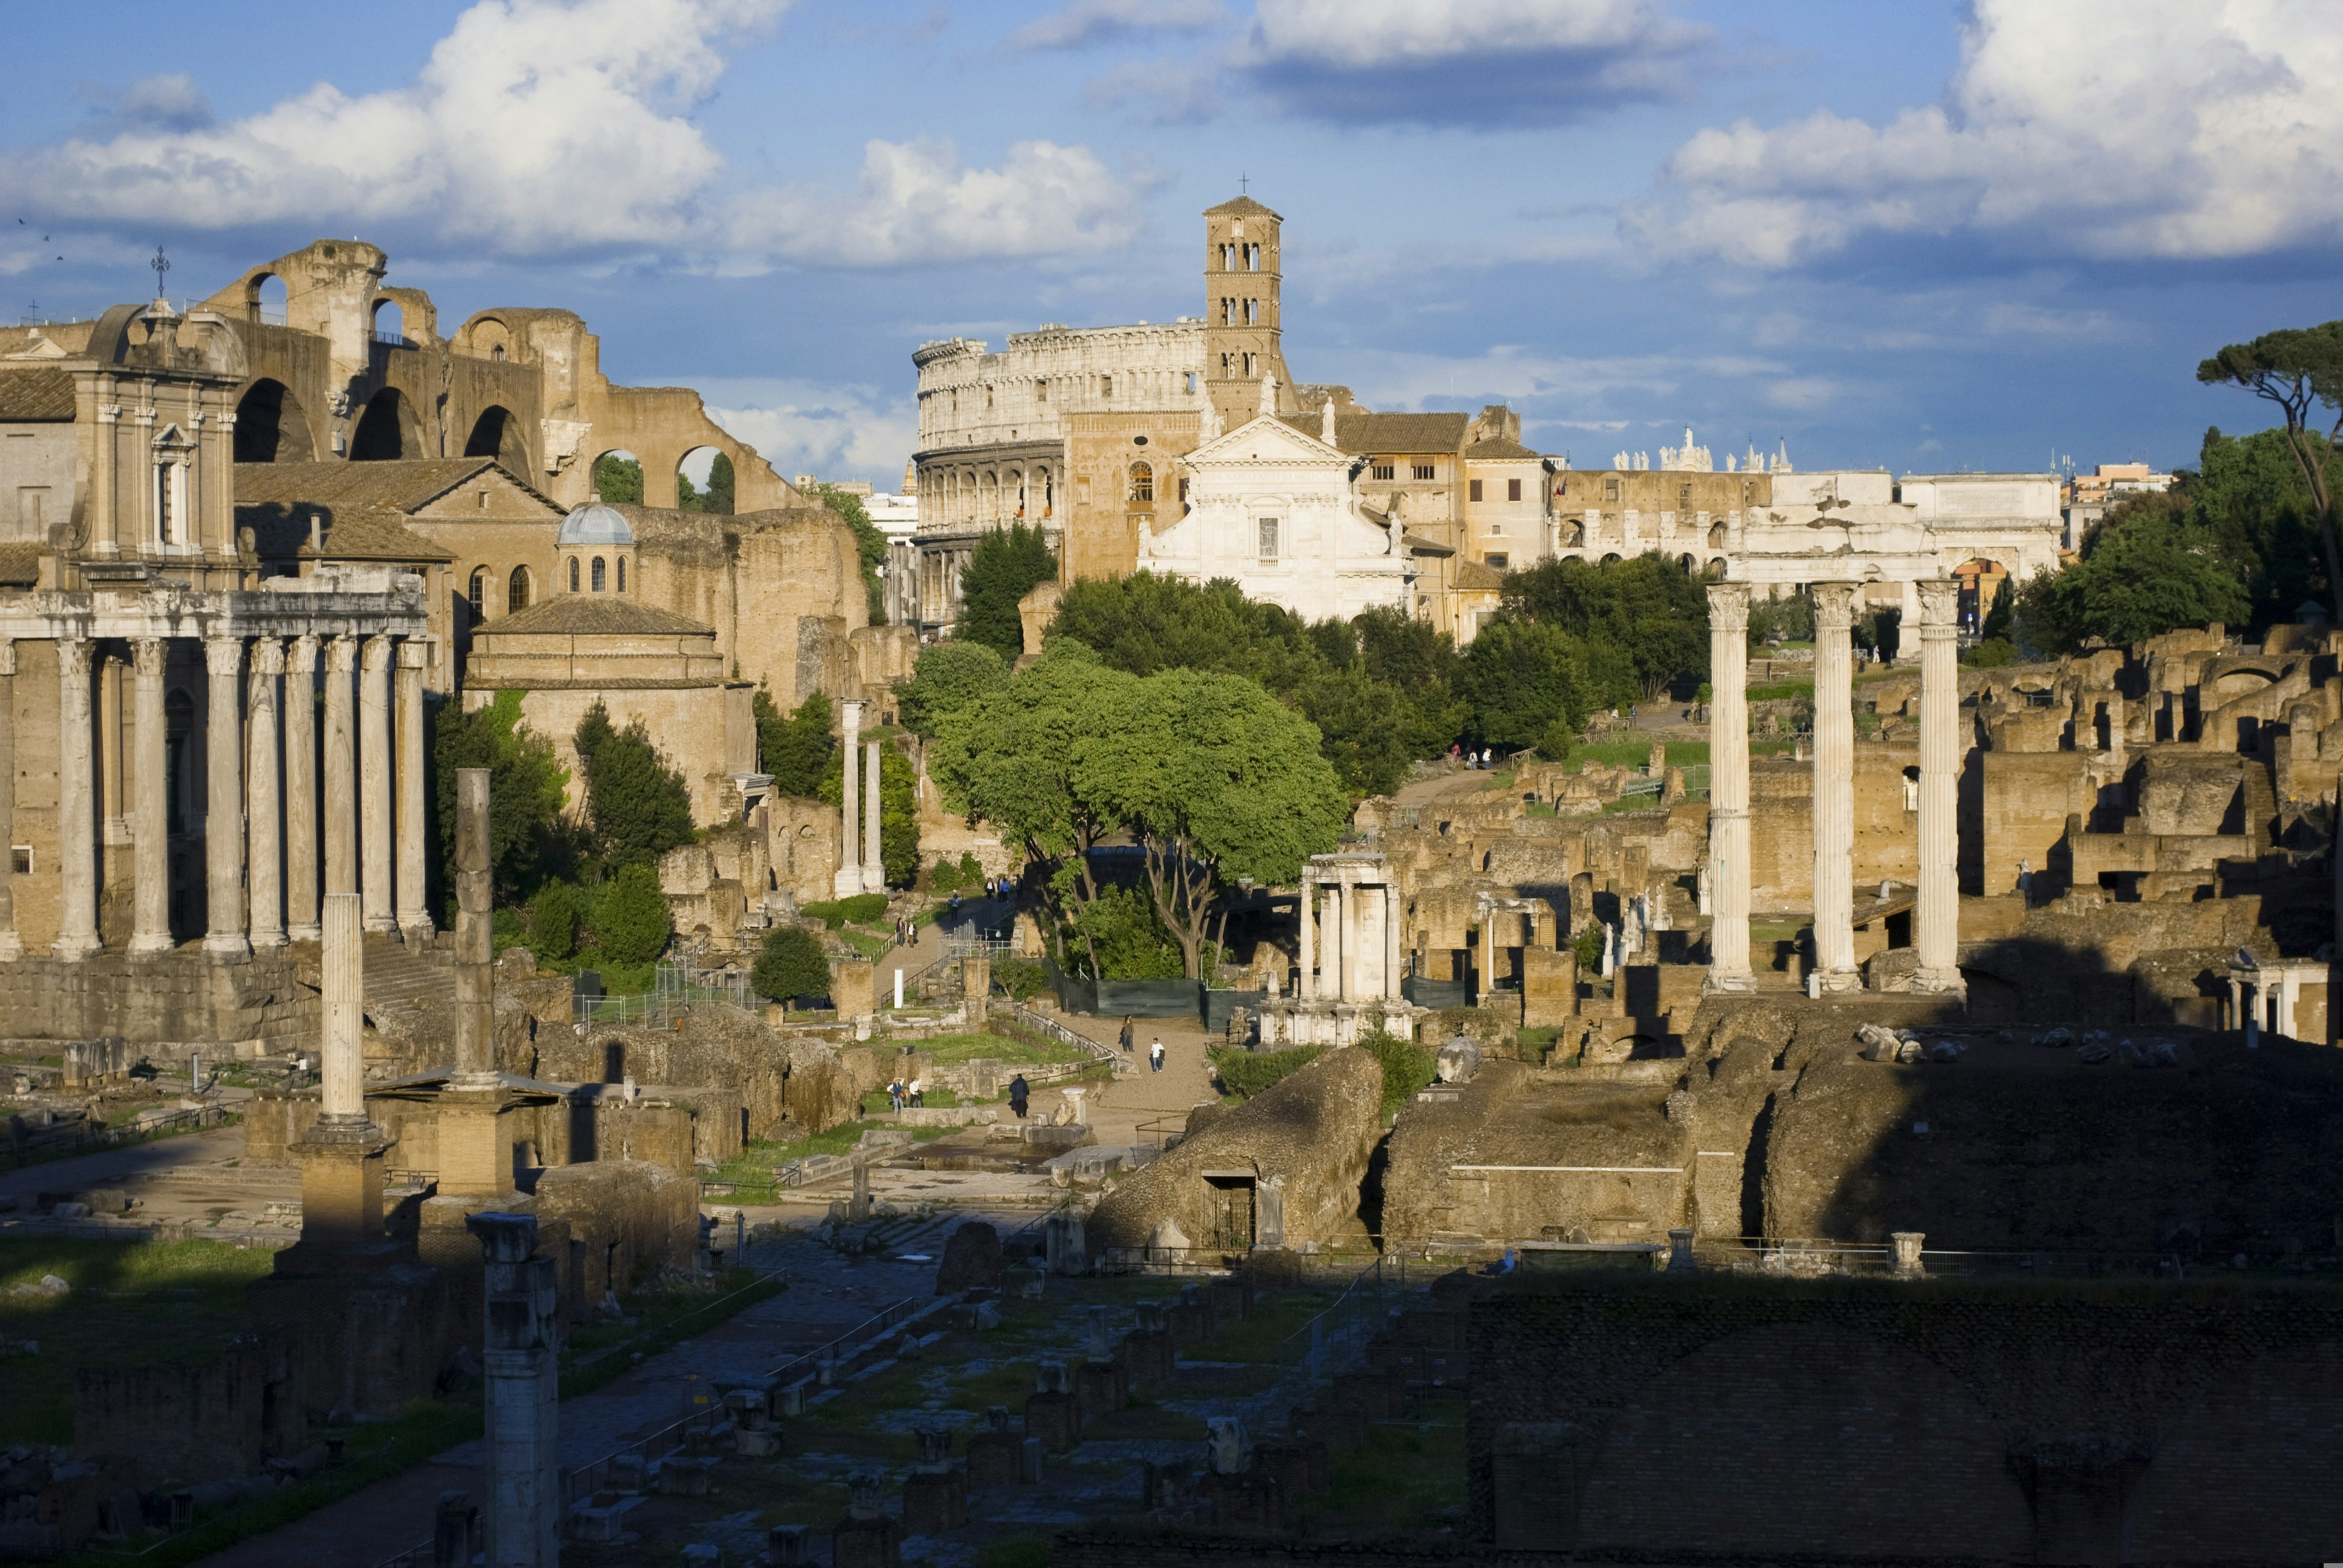 Views of the Roman Forum and Colosseum in sunlight, from the base of the Campidoglio